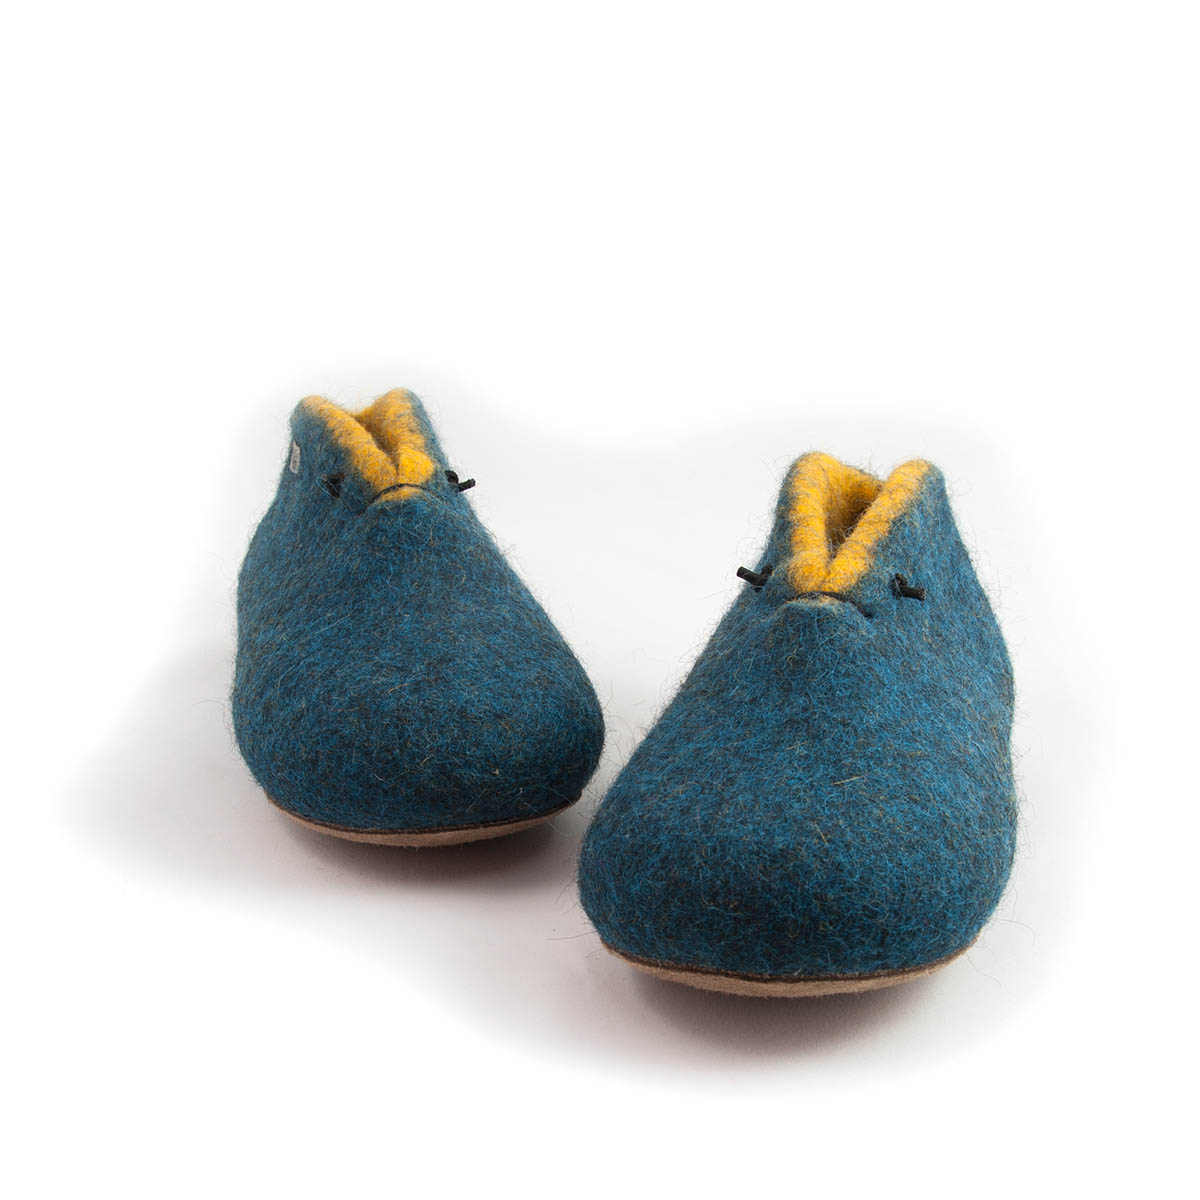 fontein Behoren Zuidoost Slipper boots in blue and yellow felted wool by Wooppers